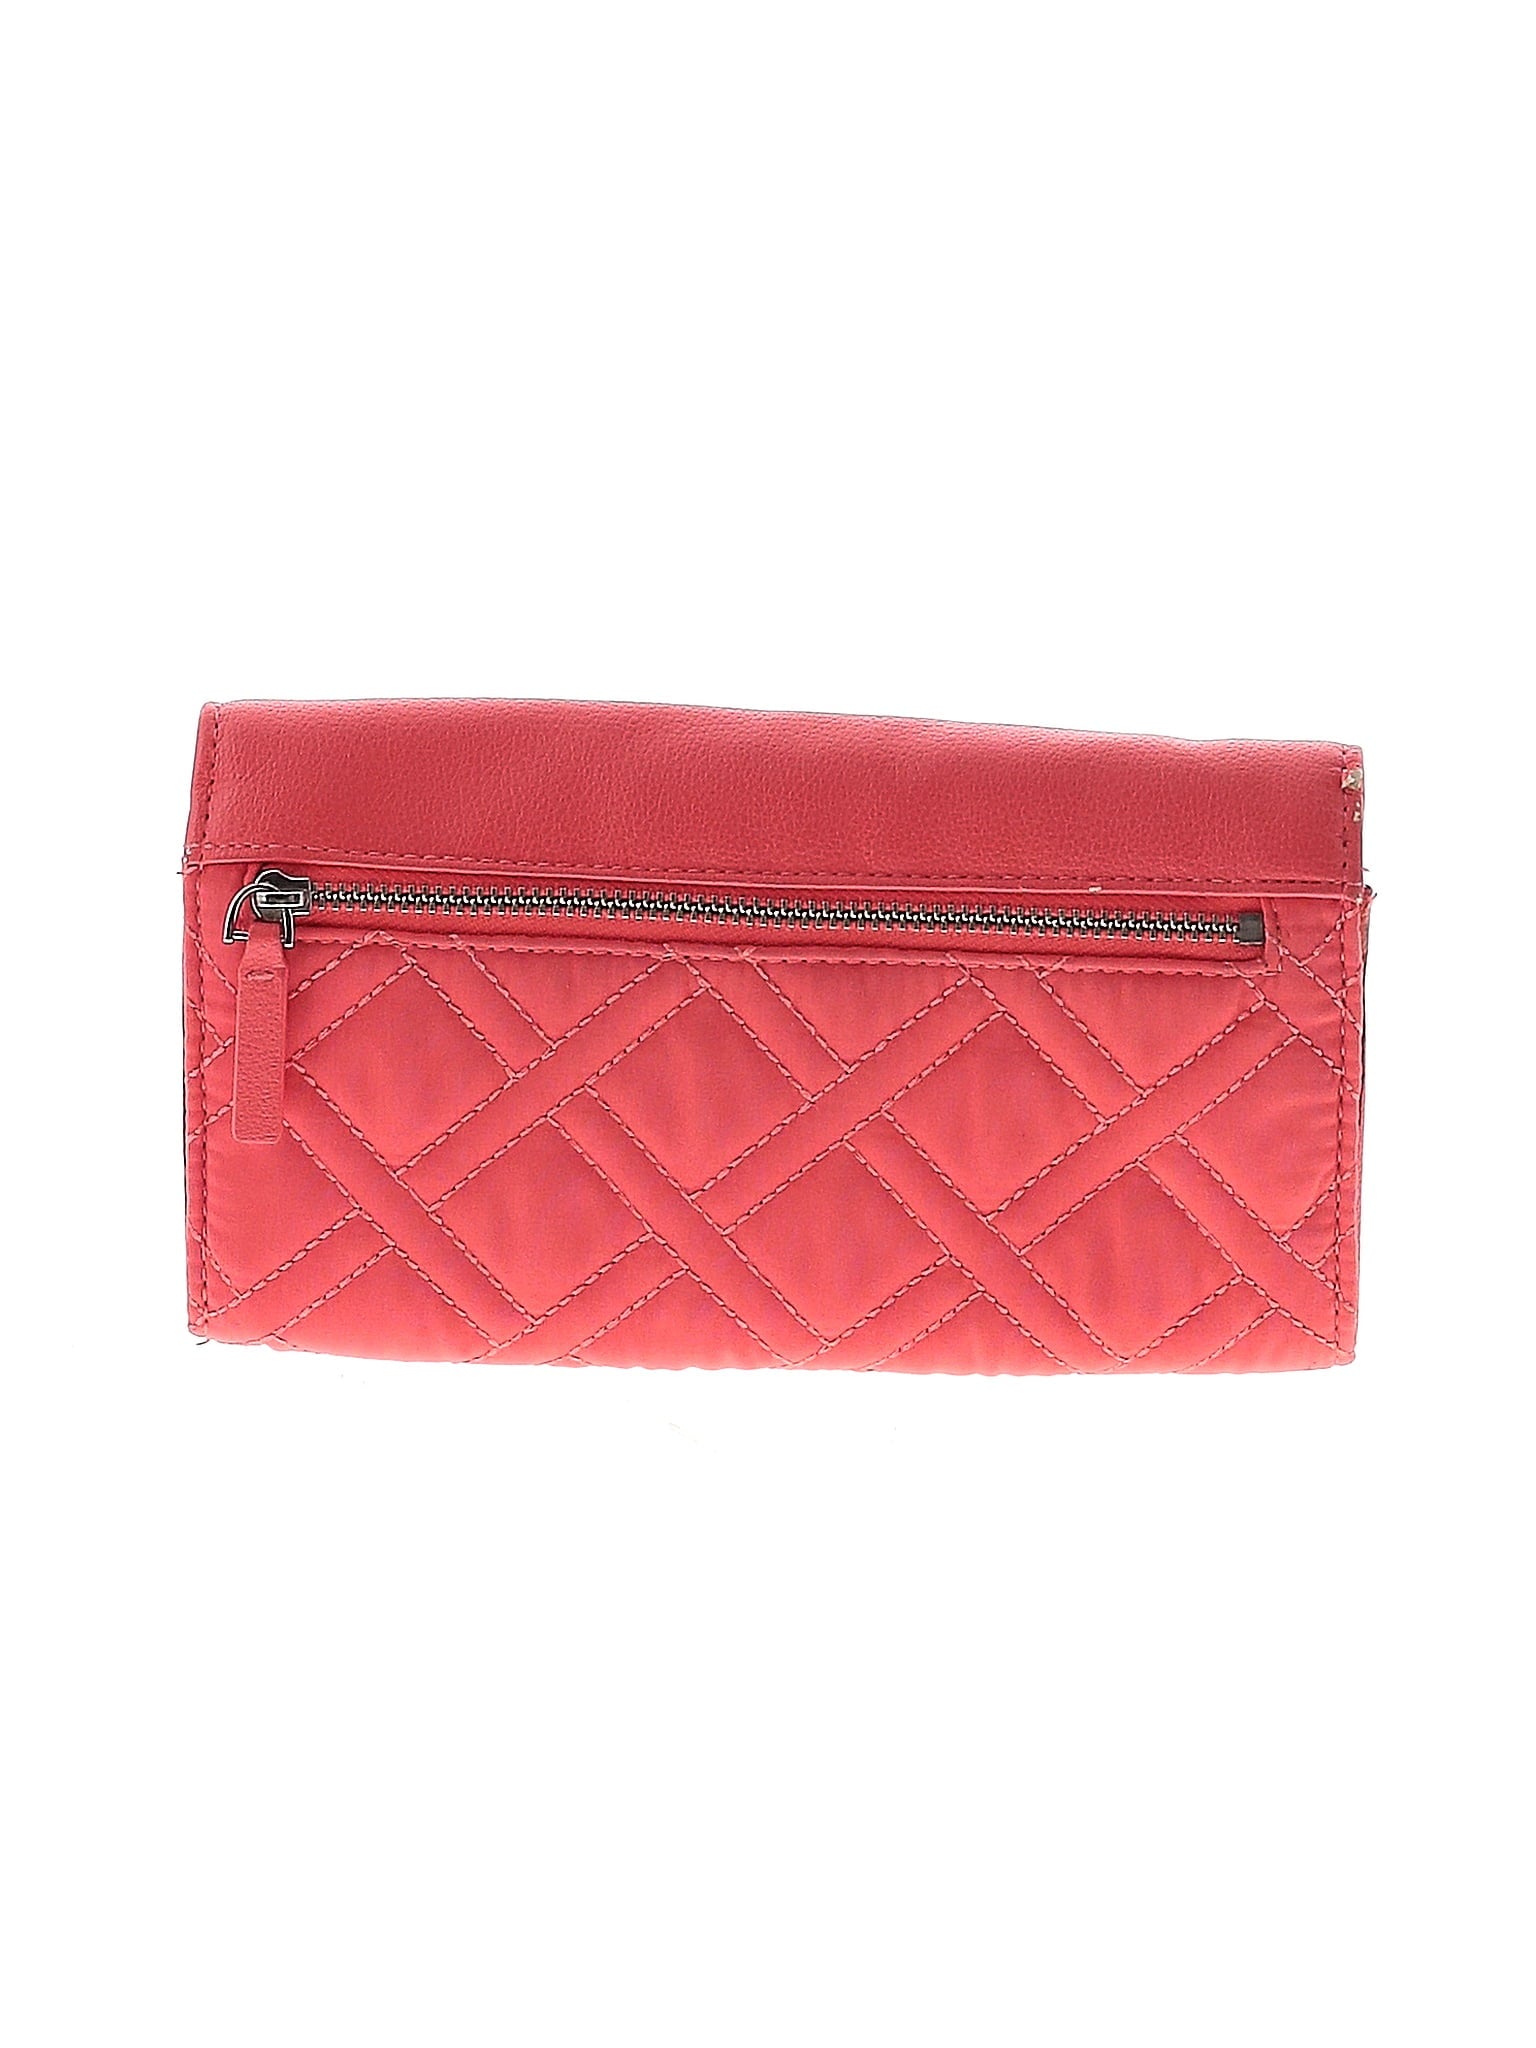 Coral Reef RFID Audrey Wallet size - One Size